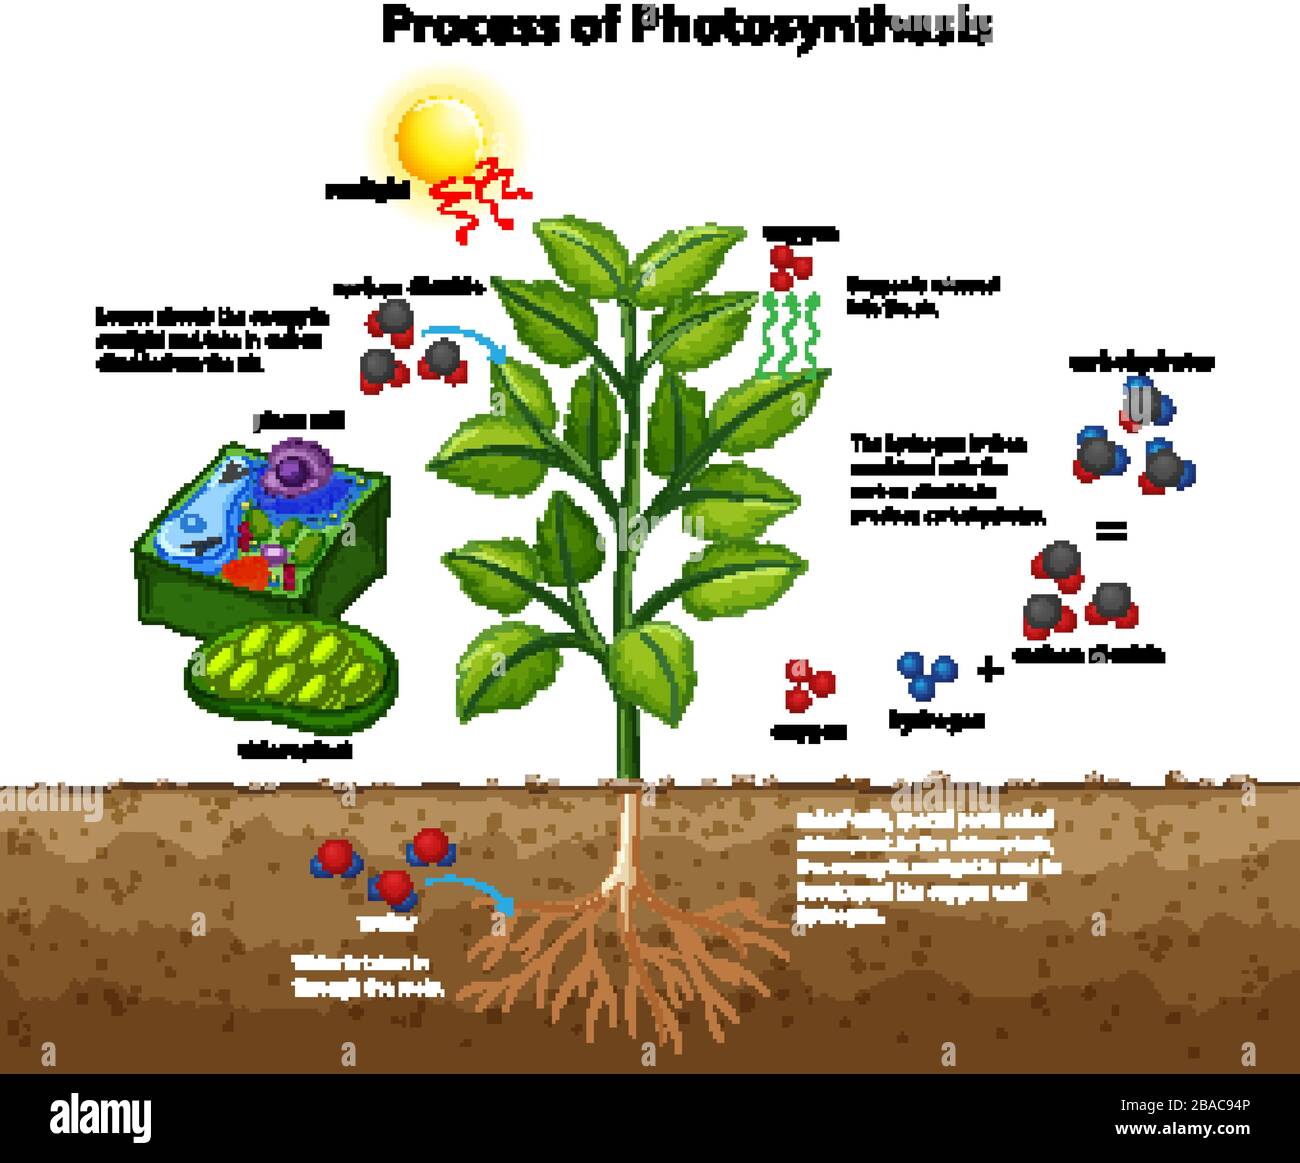 Plant Cell Photosynthesis